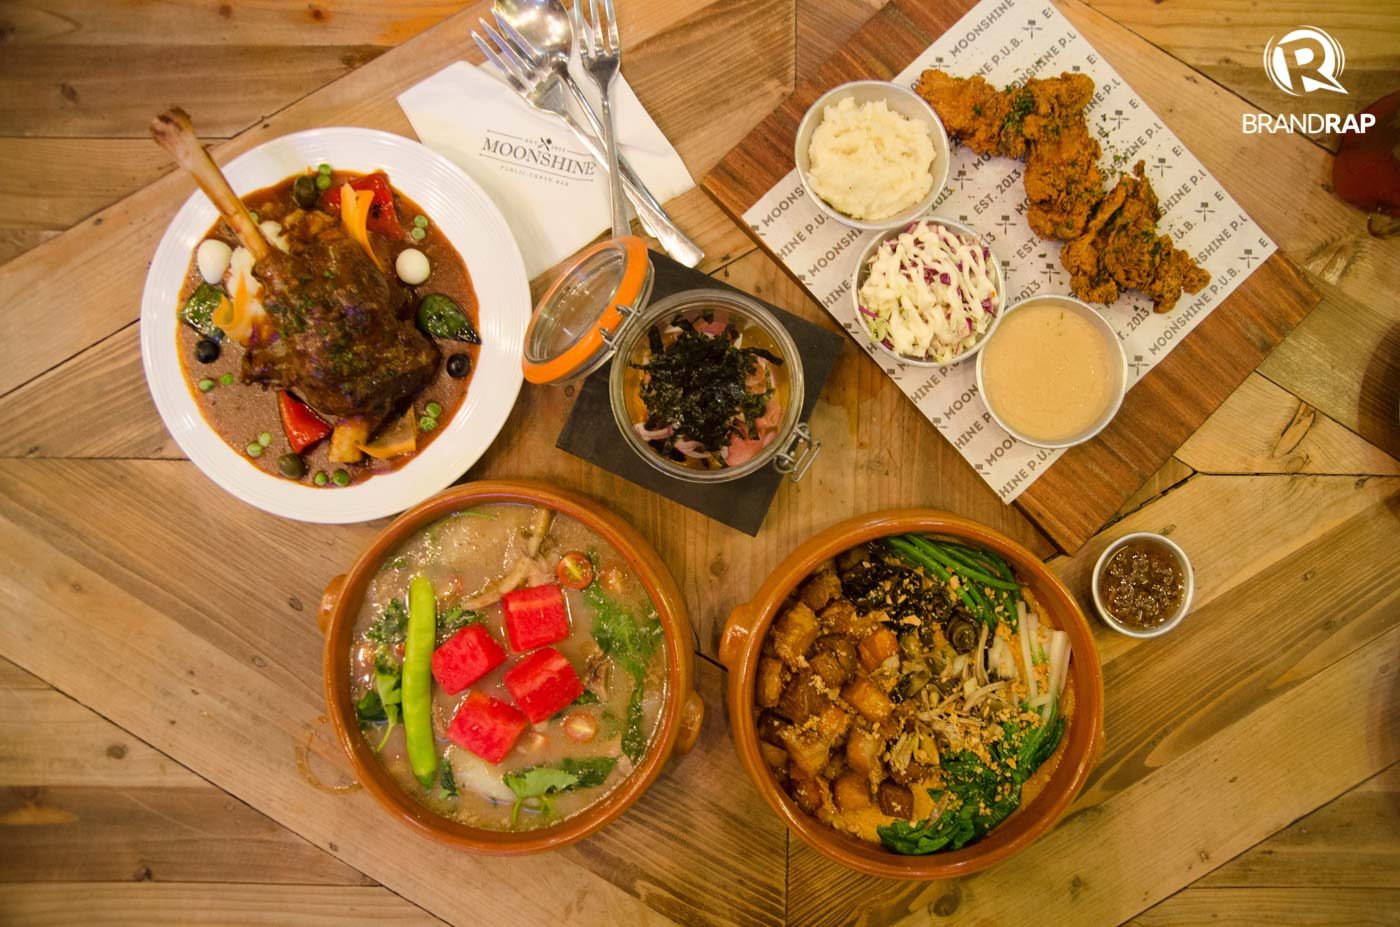 FILIPINO WITH A TWIST. Moonshine offers old favorites with a twist in its menu like Smoked Kinilaw, Lamb Shank Caldereta, Beef Short Rib Sinigang, Crispy Kare-Kare and Dolino’s own fried chicken, JFC. Try their secret Danggit and Salted Egg Pizza, too! Photo by Pauee Cadaing/Rappler 